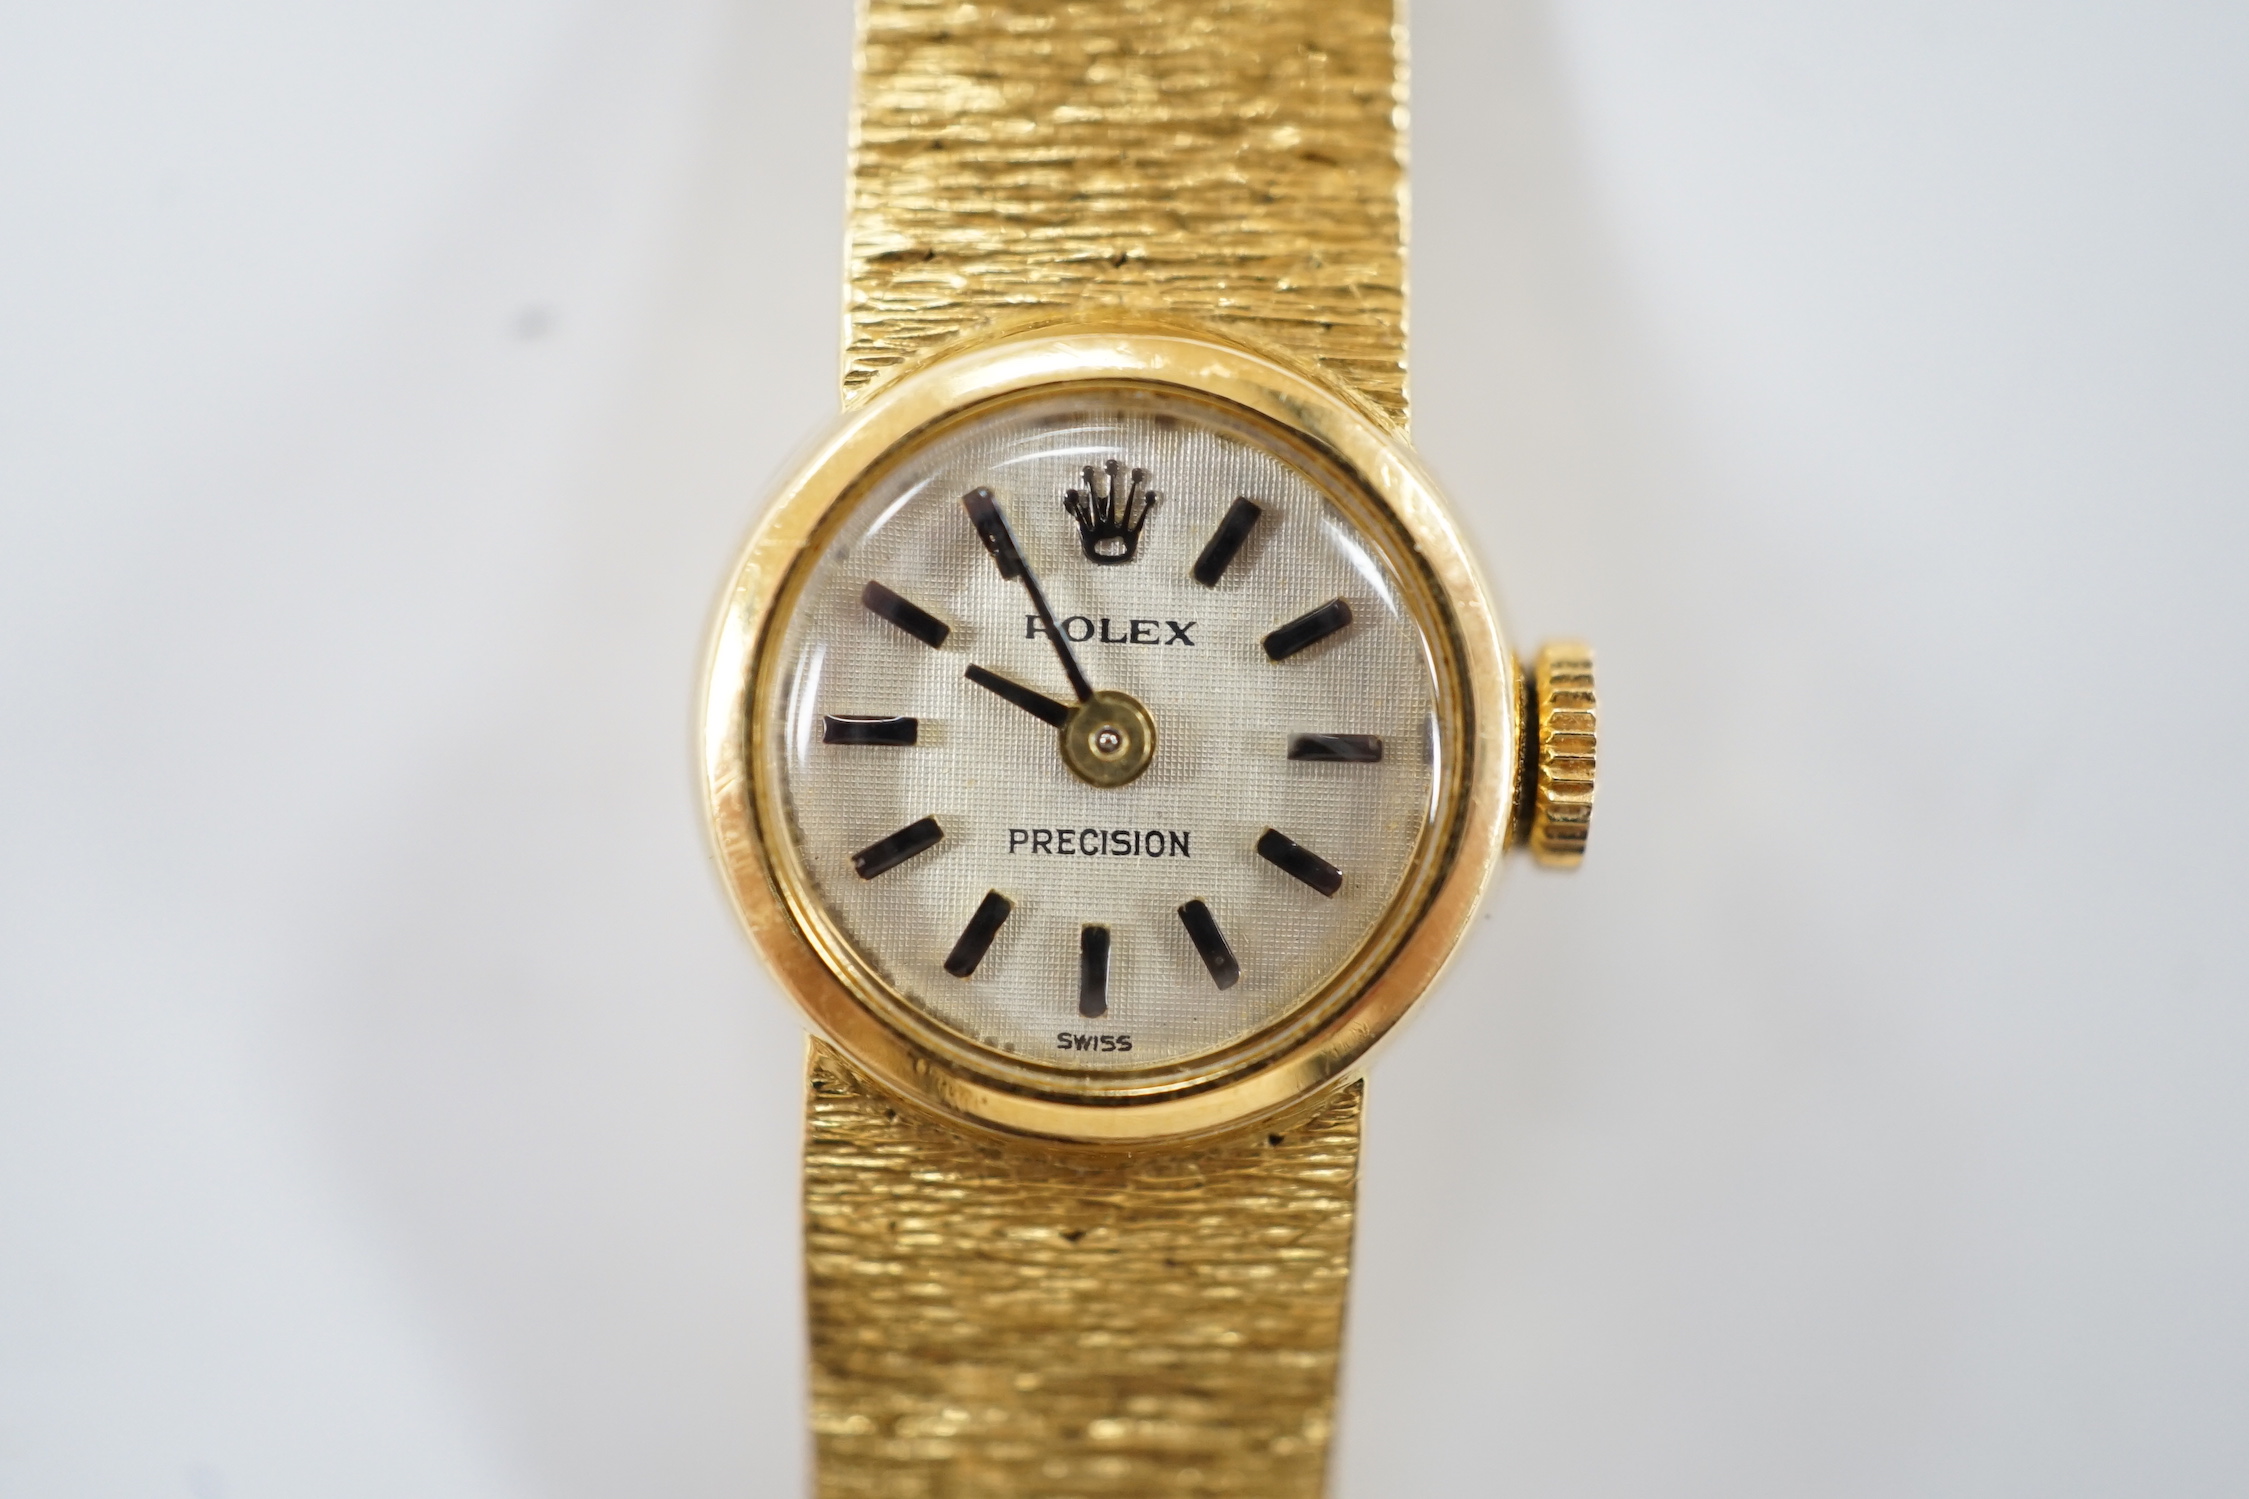 A lady's textured 750 yellow metal Rolex manual wind wrist watch, on integral bracelet, no box or papers, case diameter 15mm